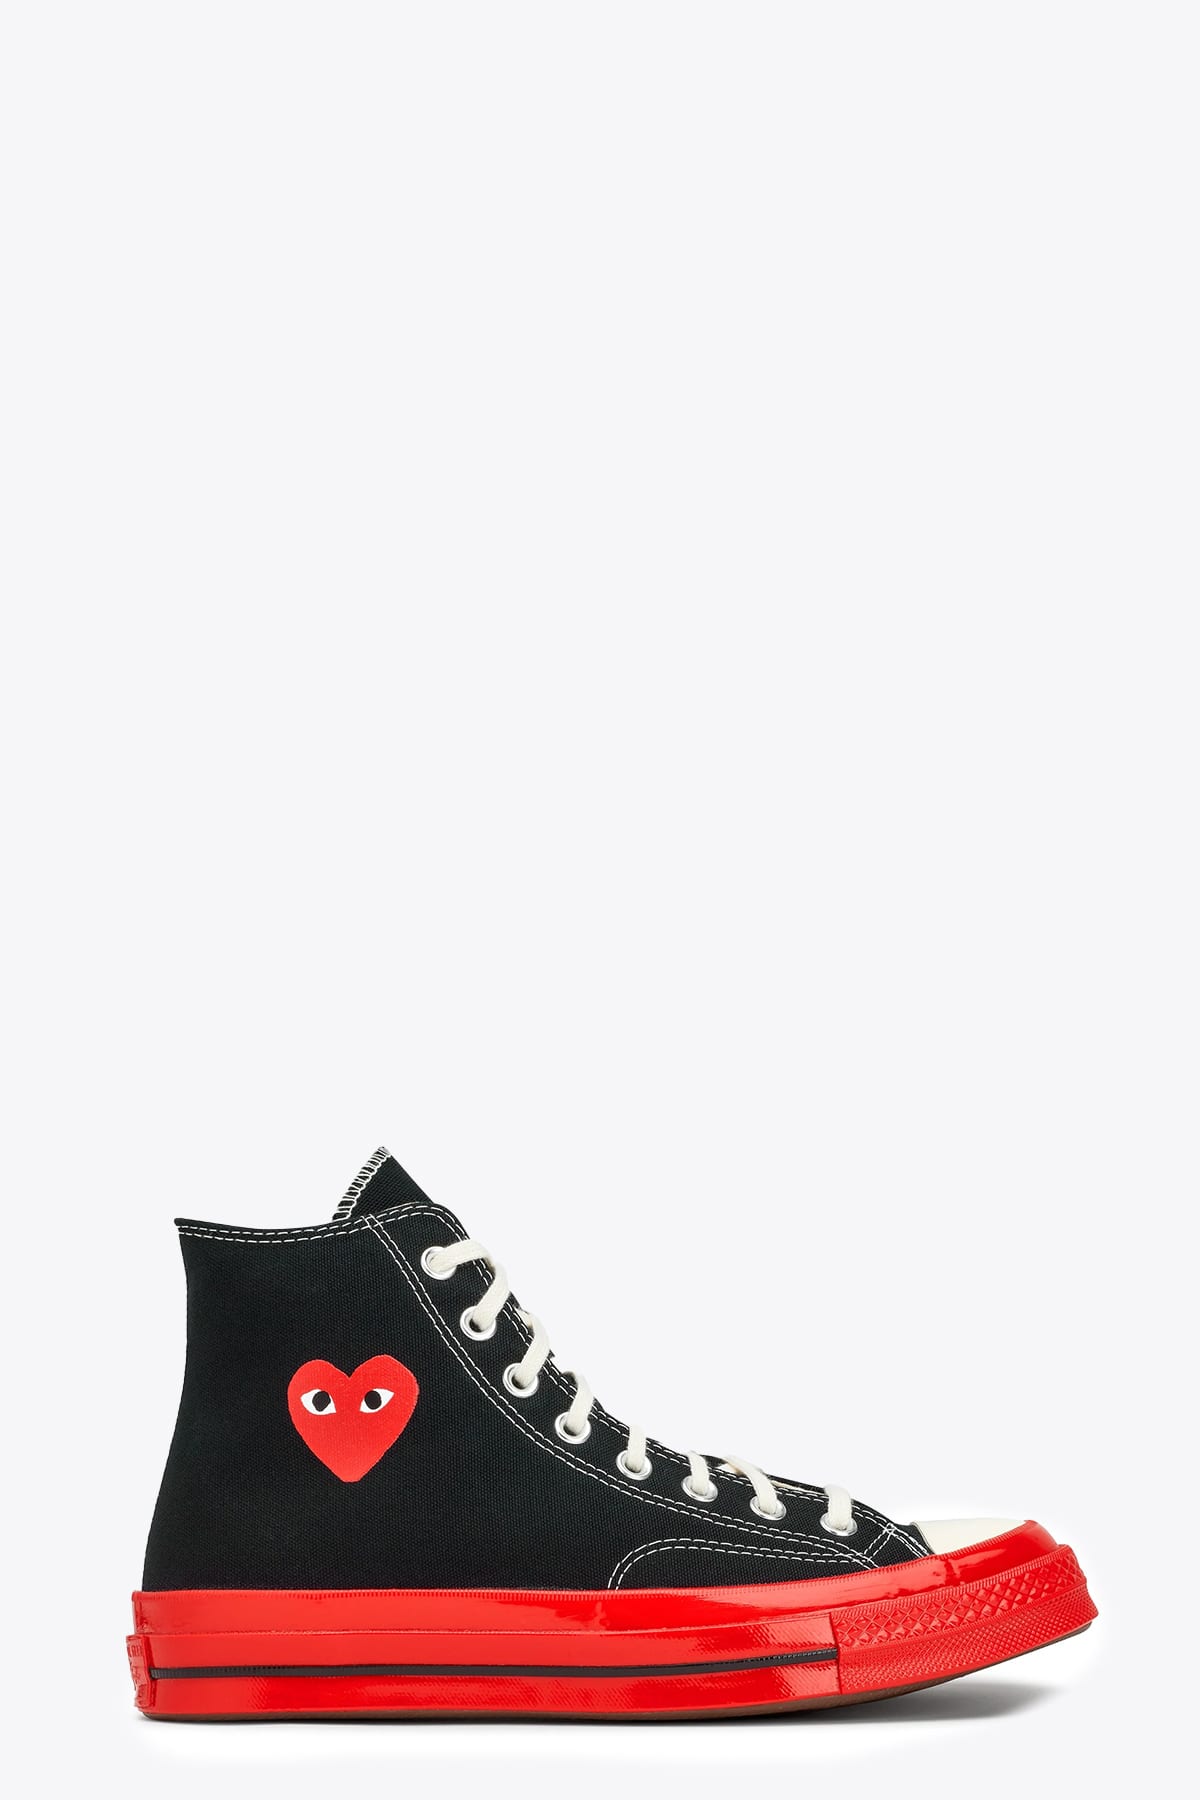 Comme des Garçons Play Ct70 Hi Top Red Sole Shoes Converse collaboration Chuck Taylor 70s black canvas sneaker with red sole.